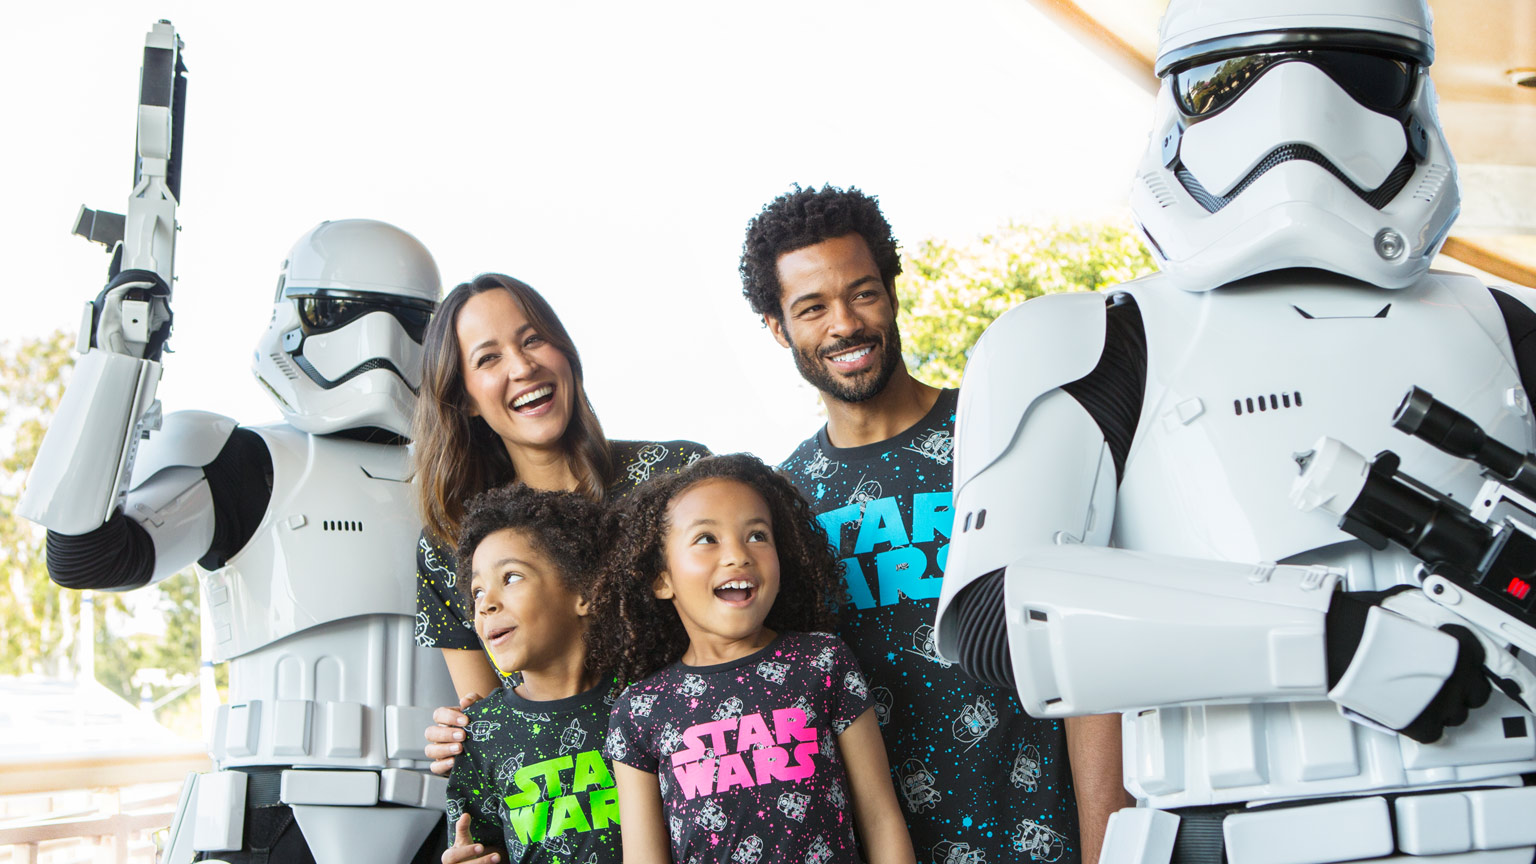 The Disney Store Celebrates Star Wars Day On May the 4th!